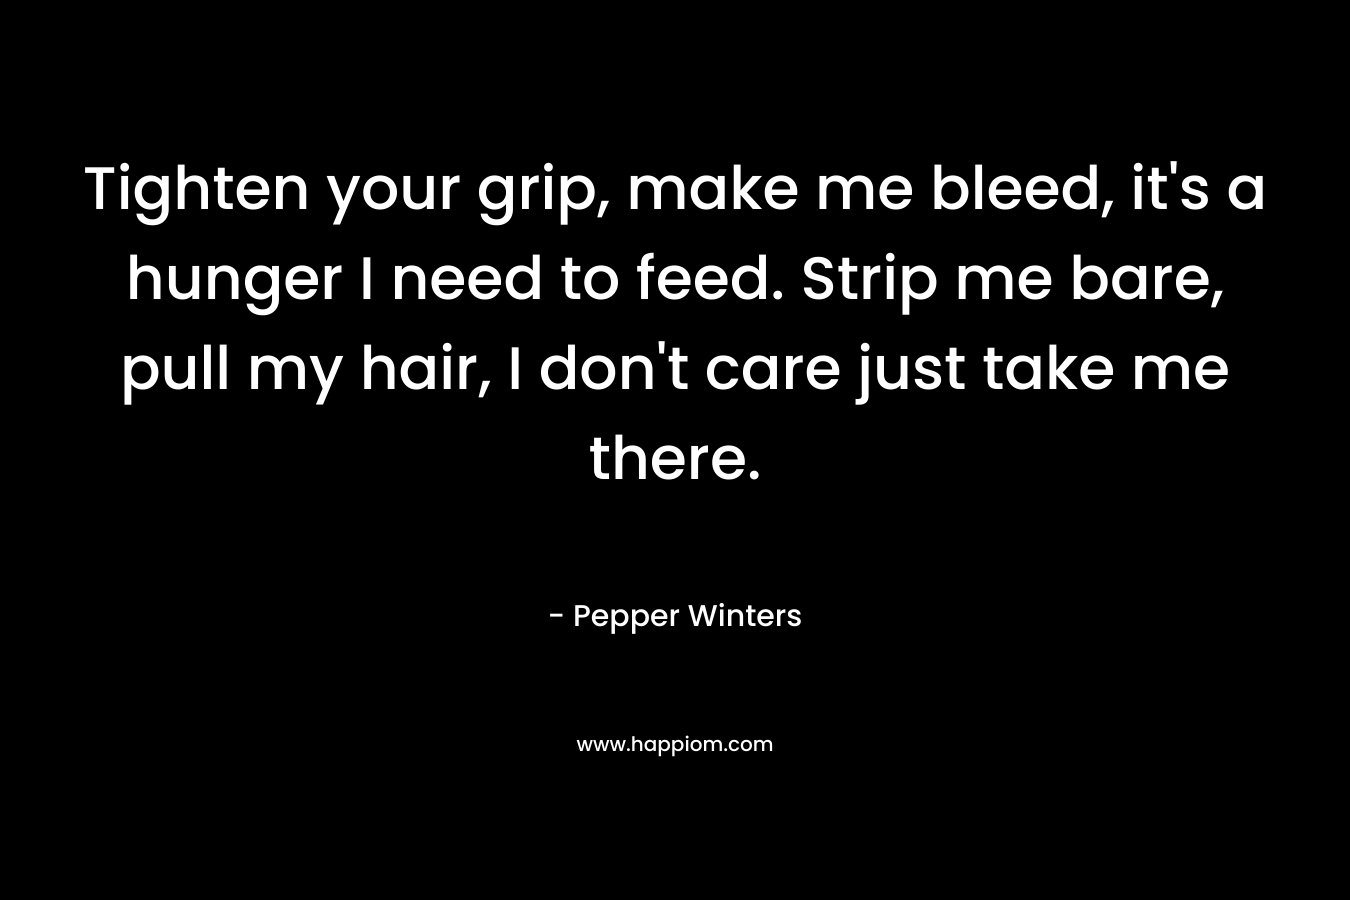 Tighten your grip, make me bleed, it’s a hunger I need to feed. Strip me bare, pull my hair, I don’t care just take me there. – Pepper Winters